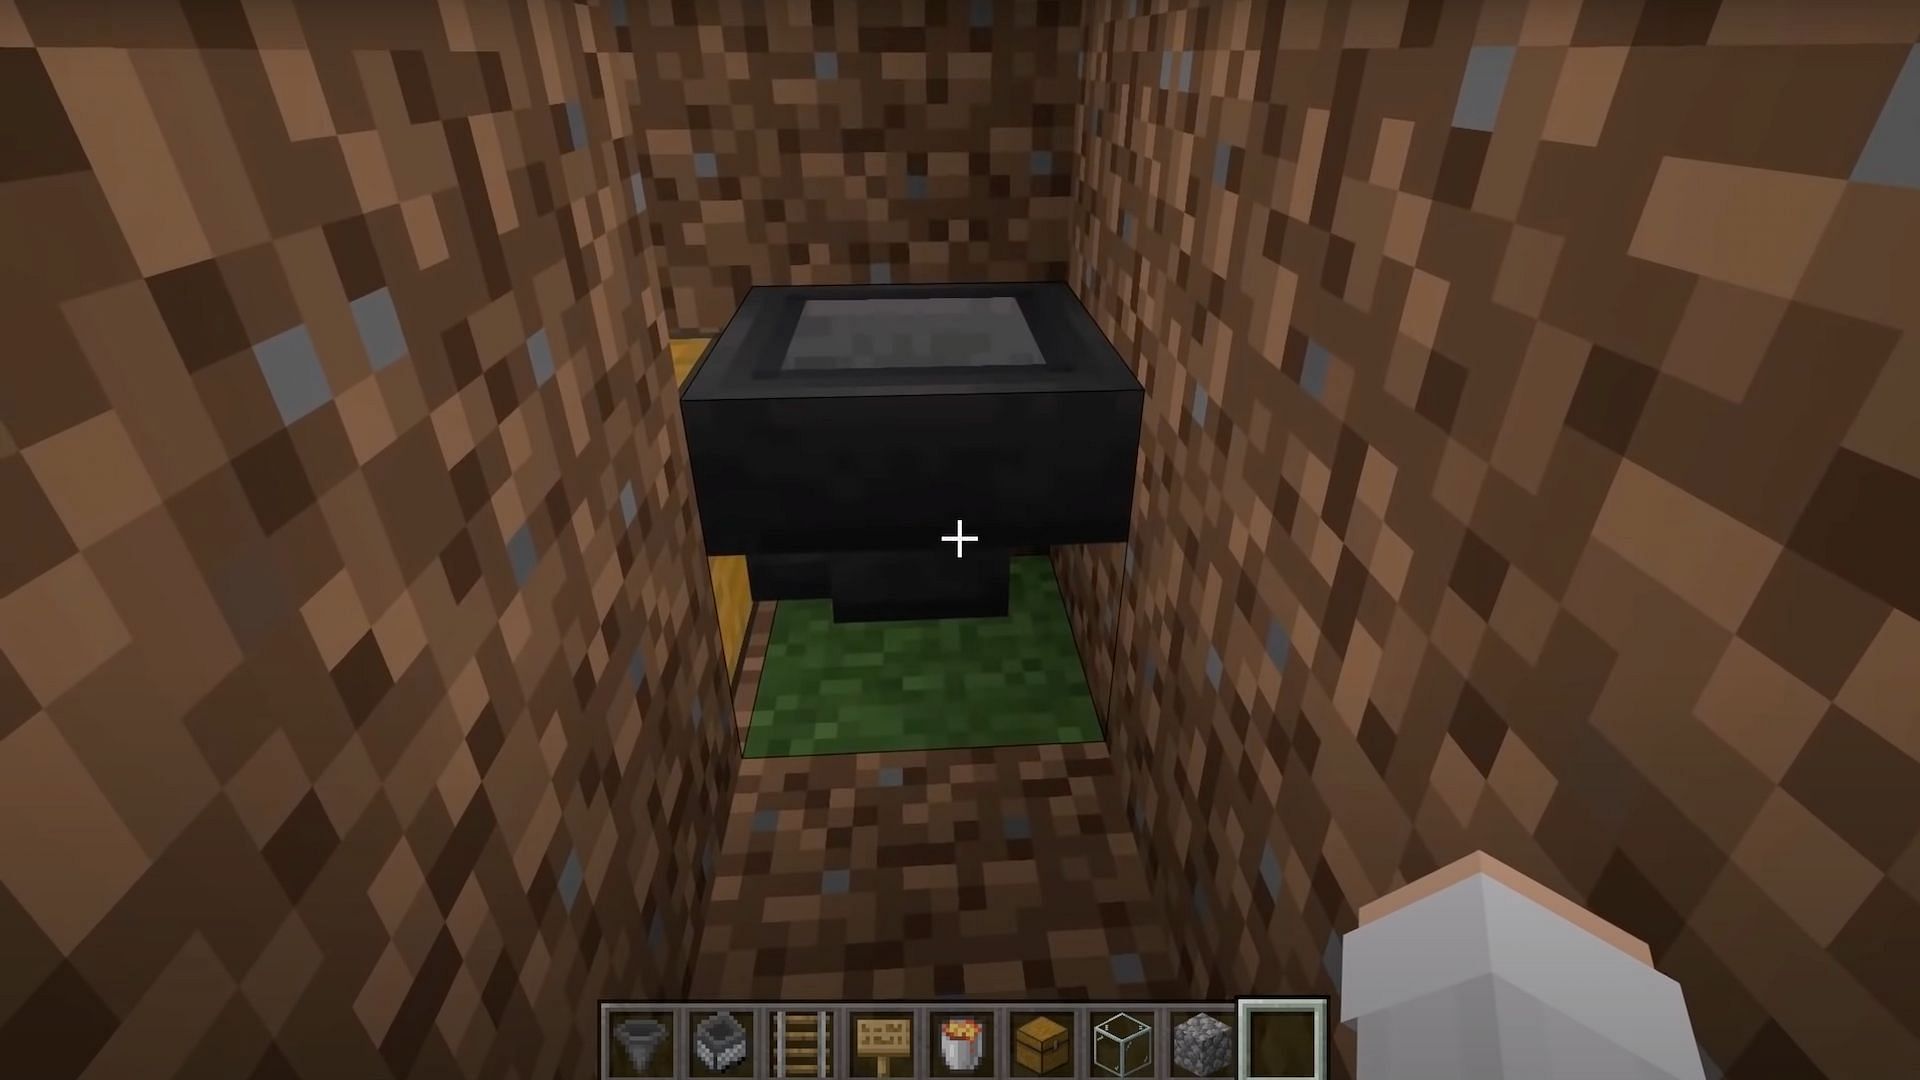 Players can break 6 blocks next to the hopper to make sure the hopper is facing the right way (Image via JC Playz/YouTube)